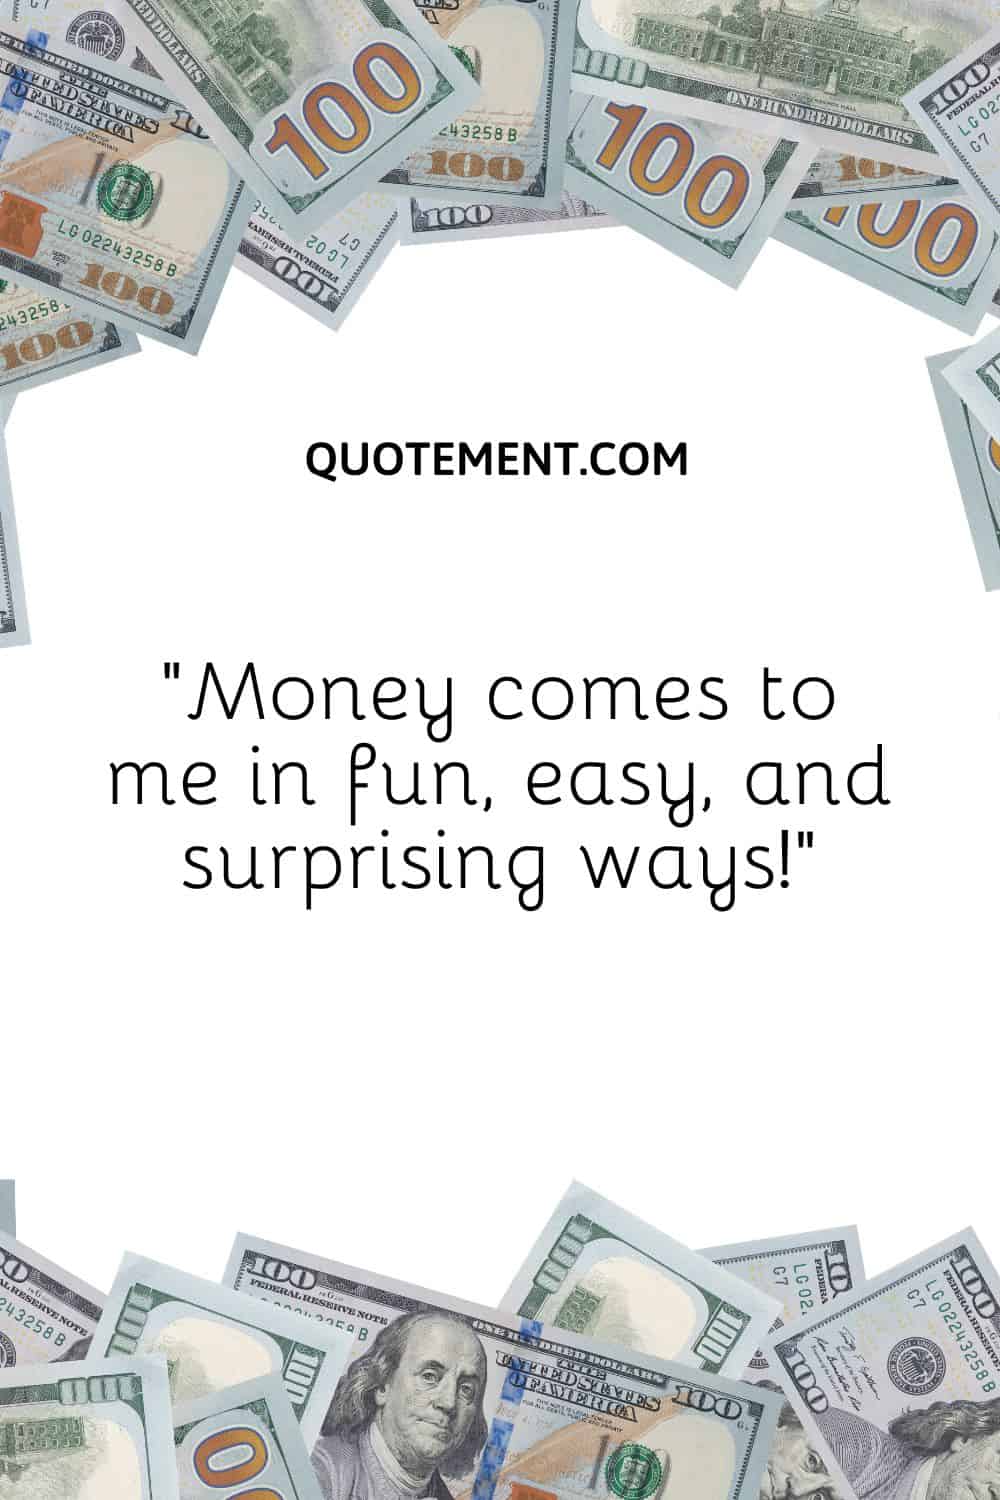 “Money comes to me in fun, easy, and surprising ways!”